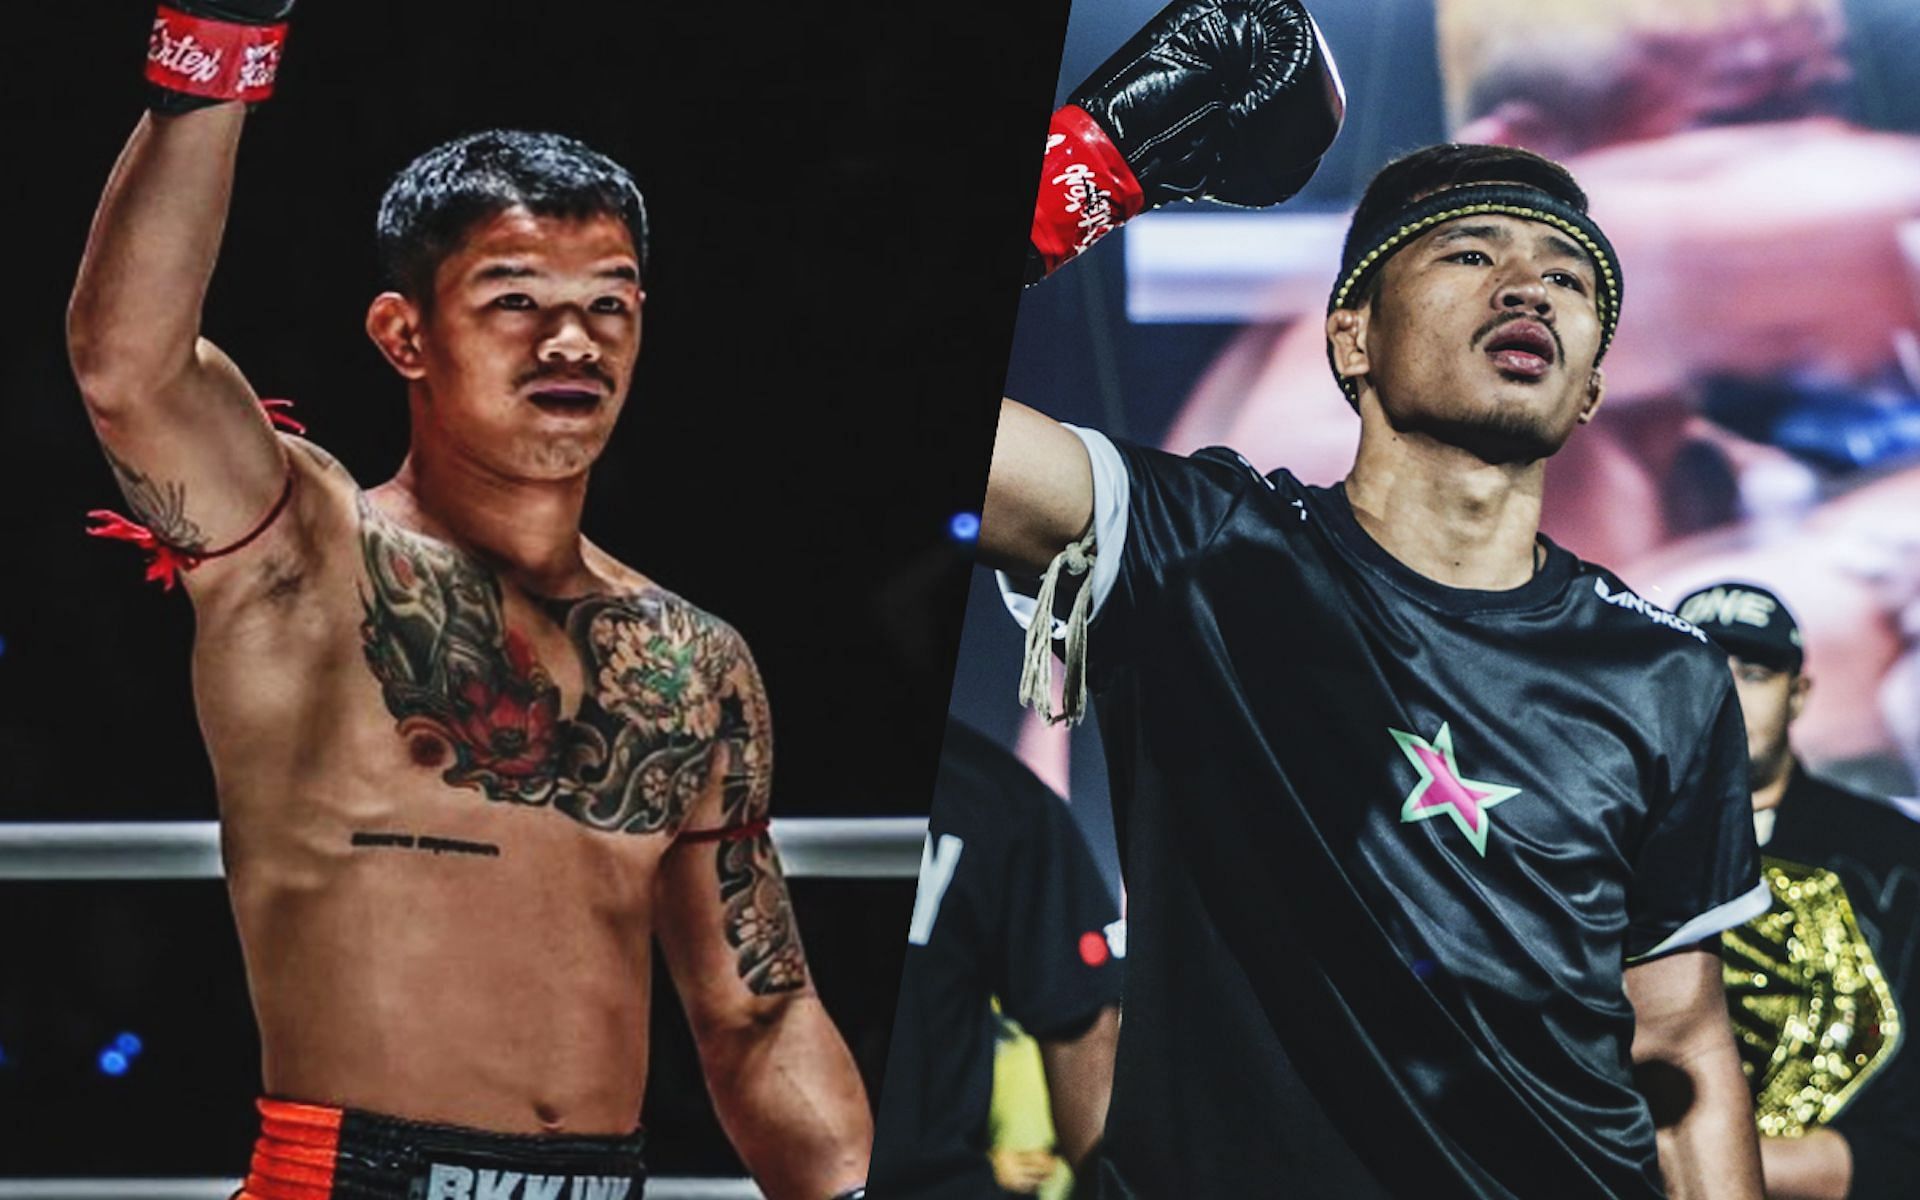 Kongthoranee Sor Sommai (left) is brimming with confidence ahead of massive fight against Superlek Kiatmoo9 (right).